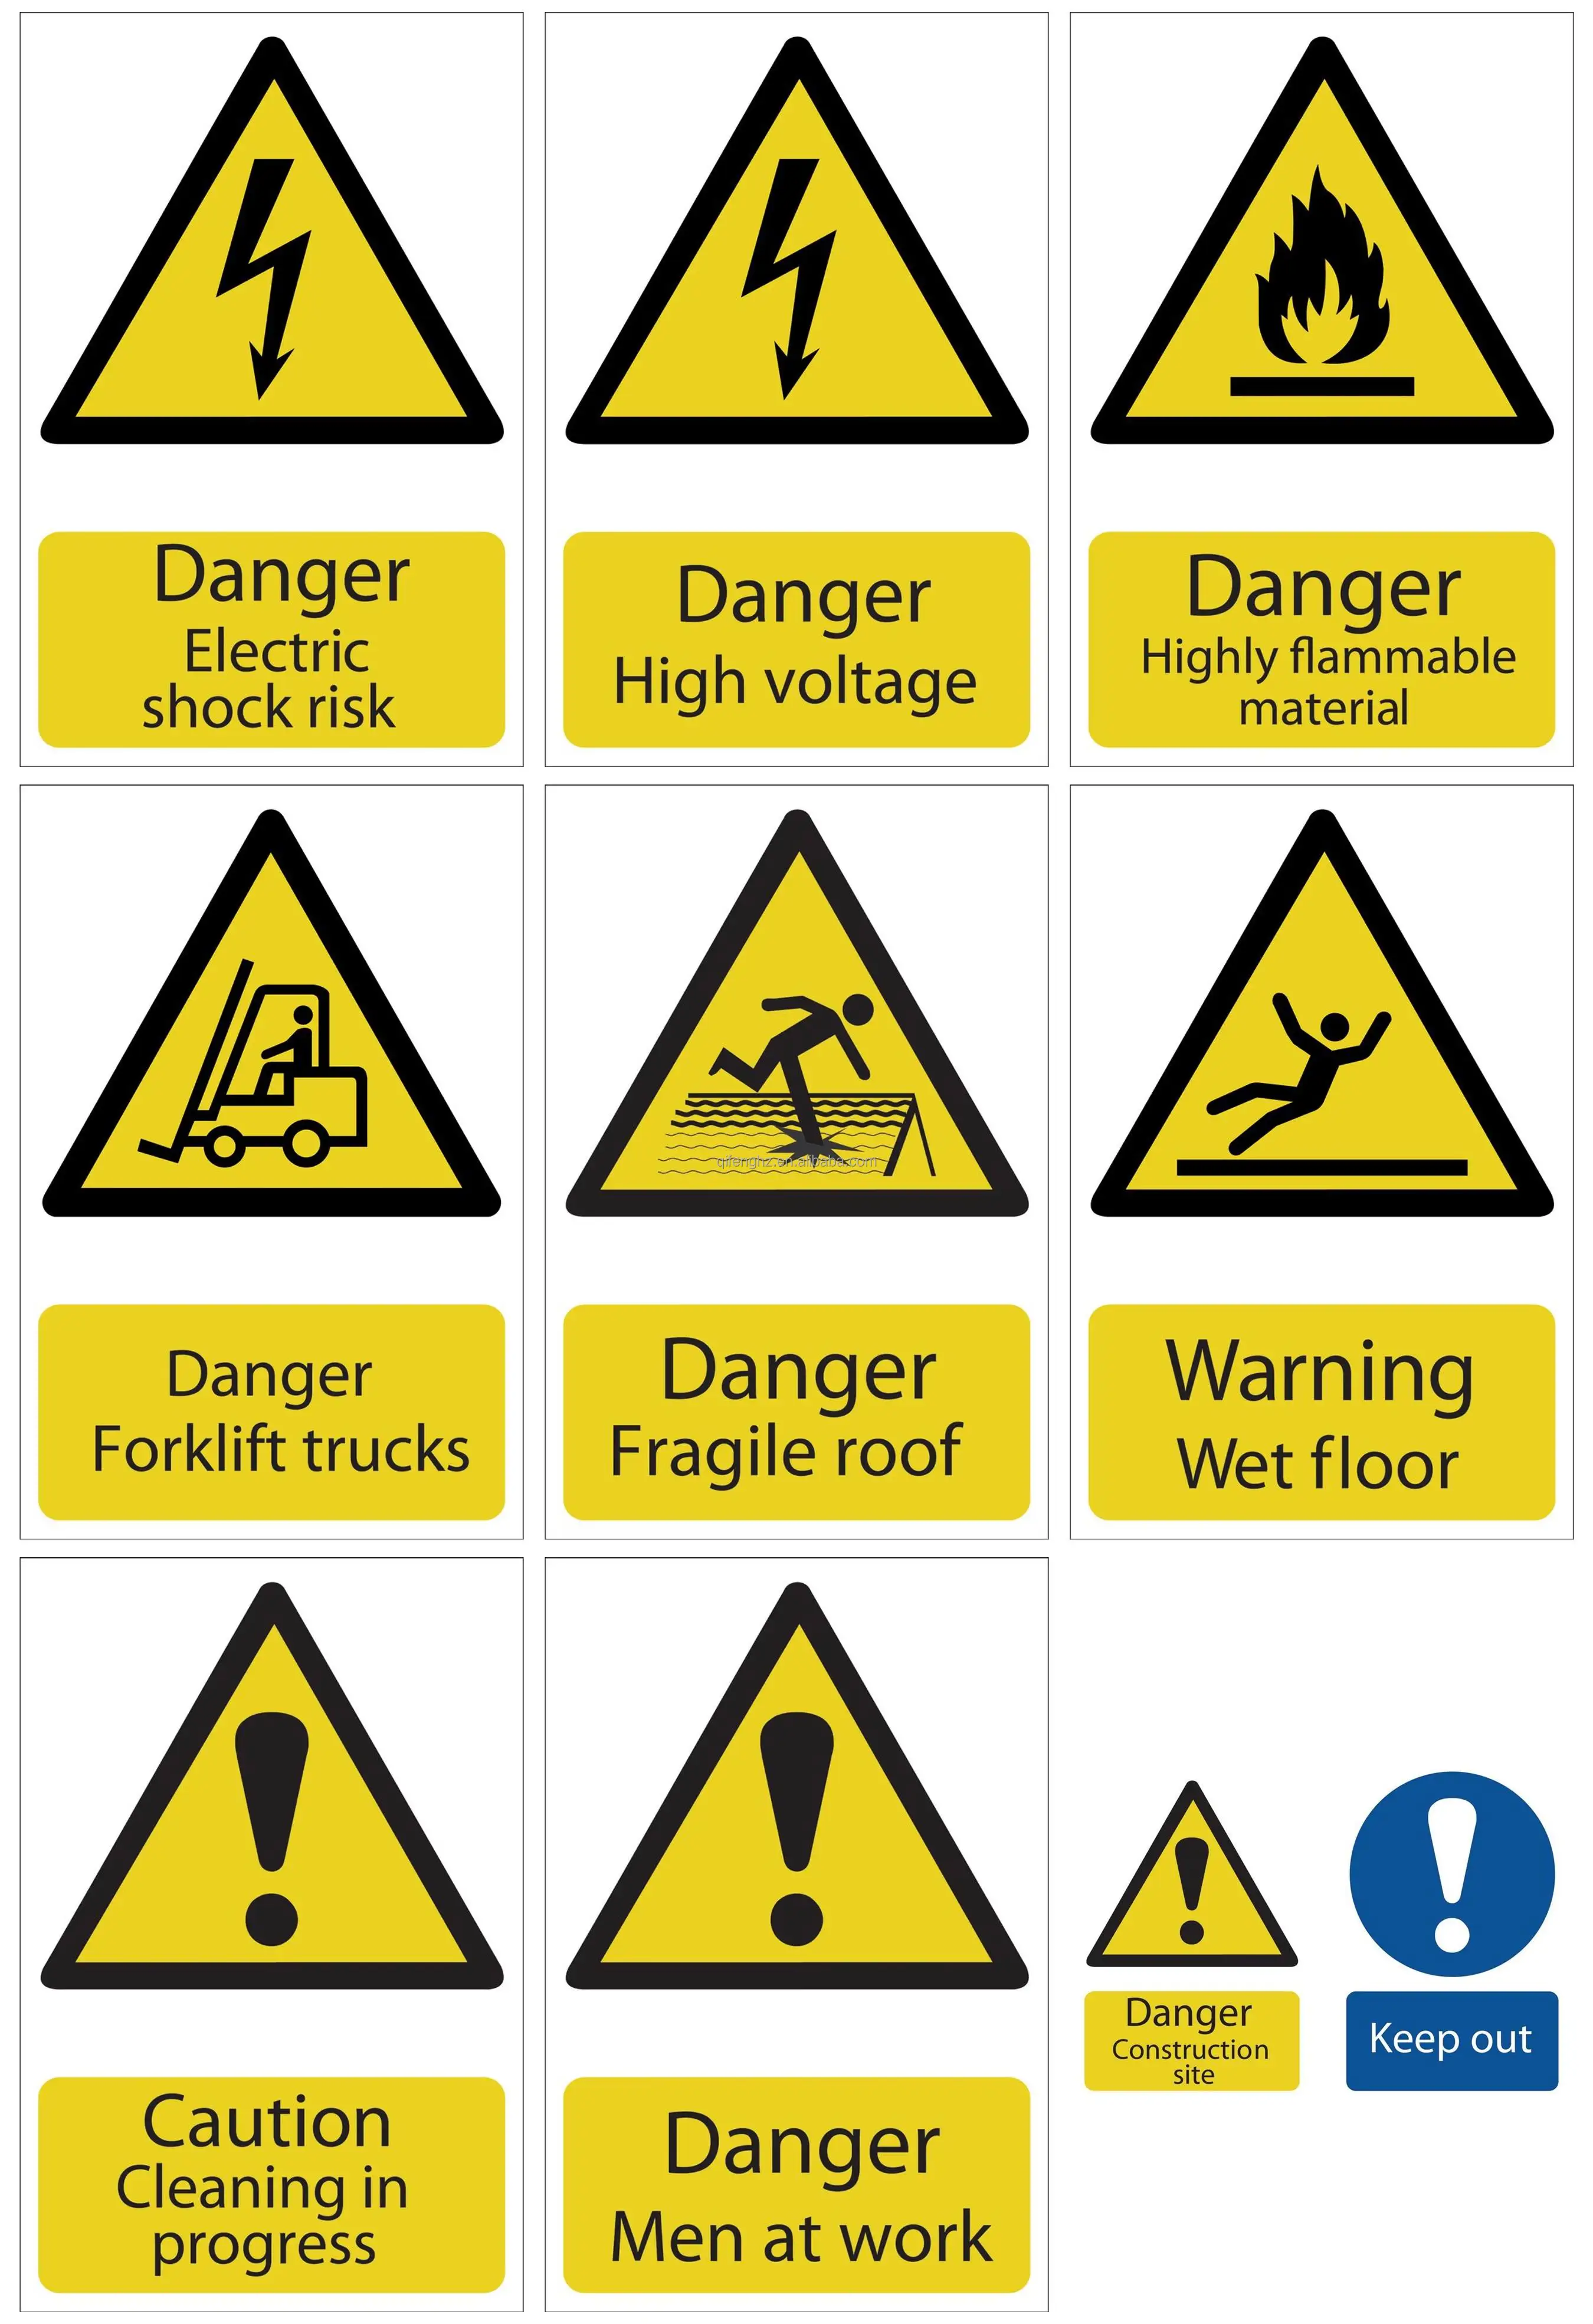 Customized Safety Signs Harzard Warning Fire Equipment Mandatory ...